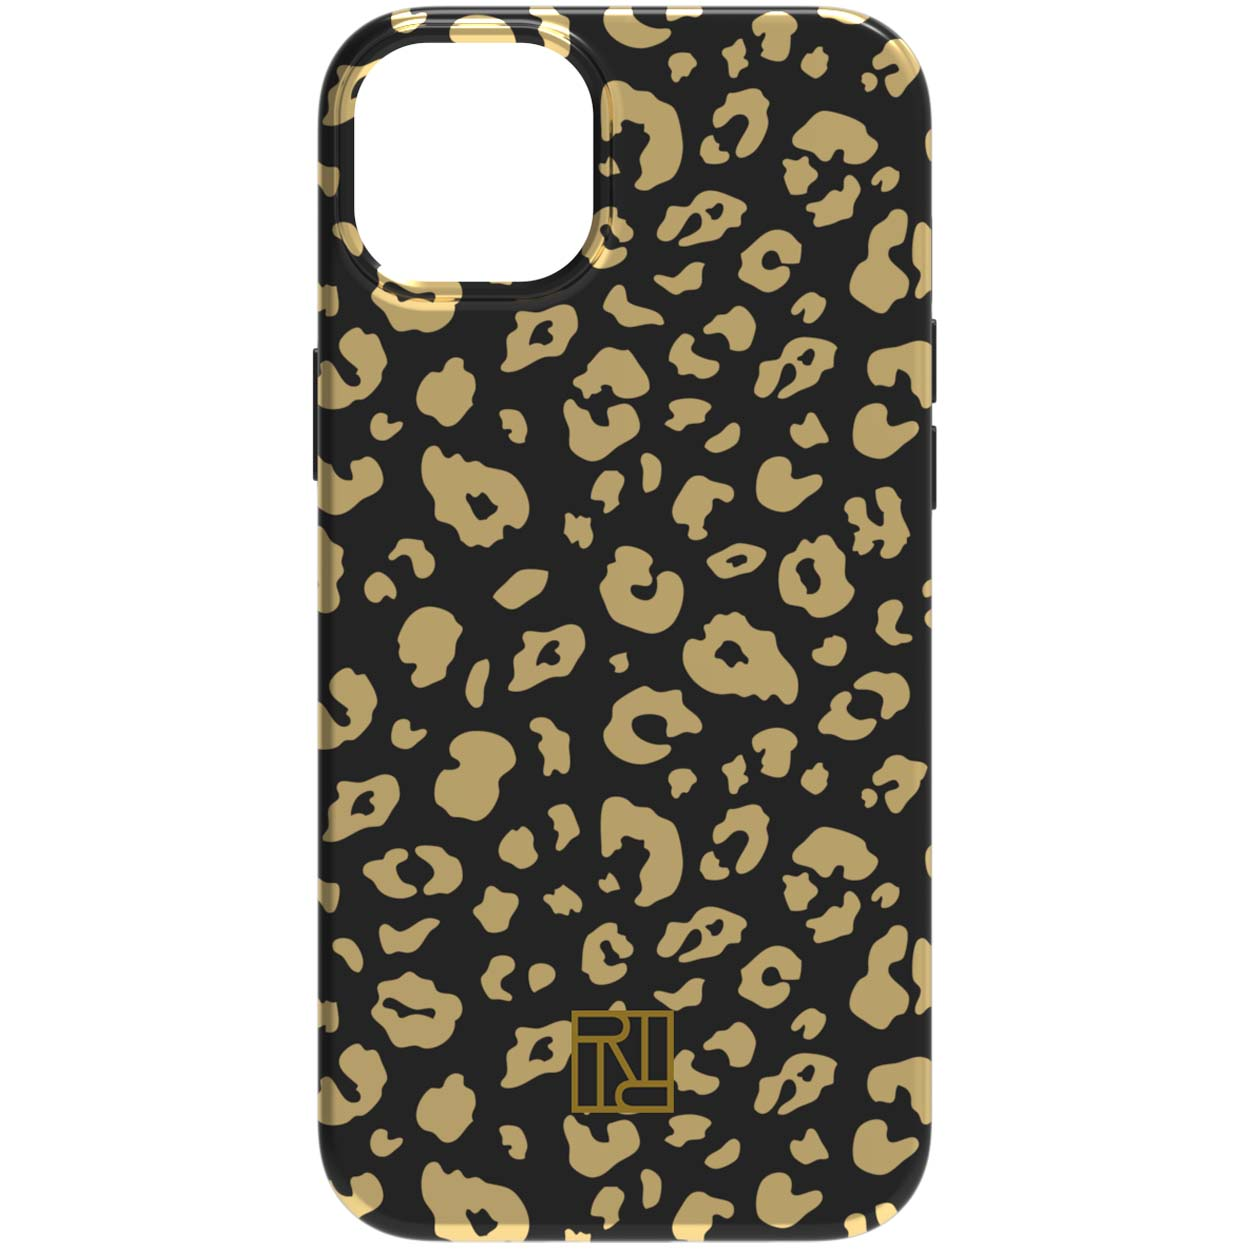 RICHMOND & FINCH Gold 14 APPLE, Backcover, IPHONE Leopard, COLOURFUL PLUS